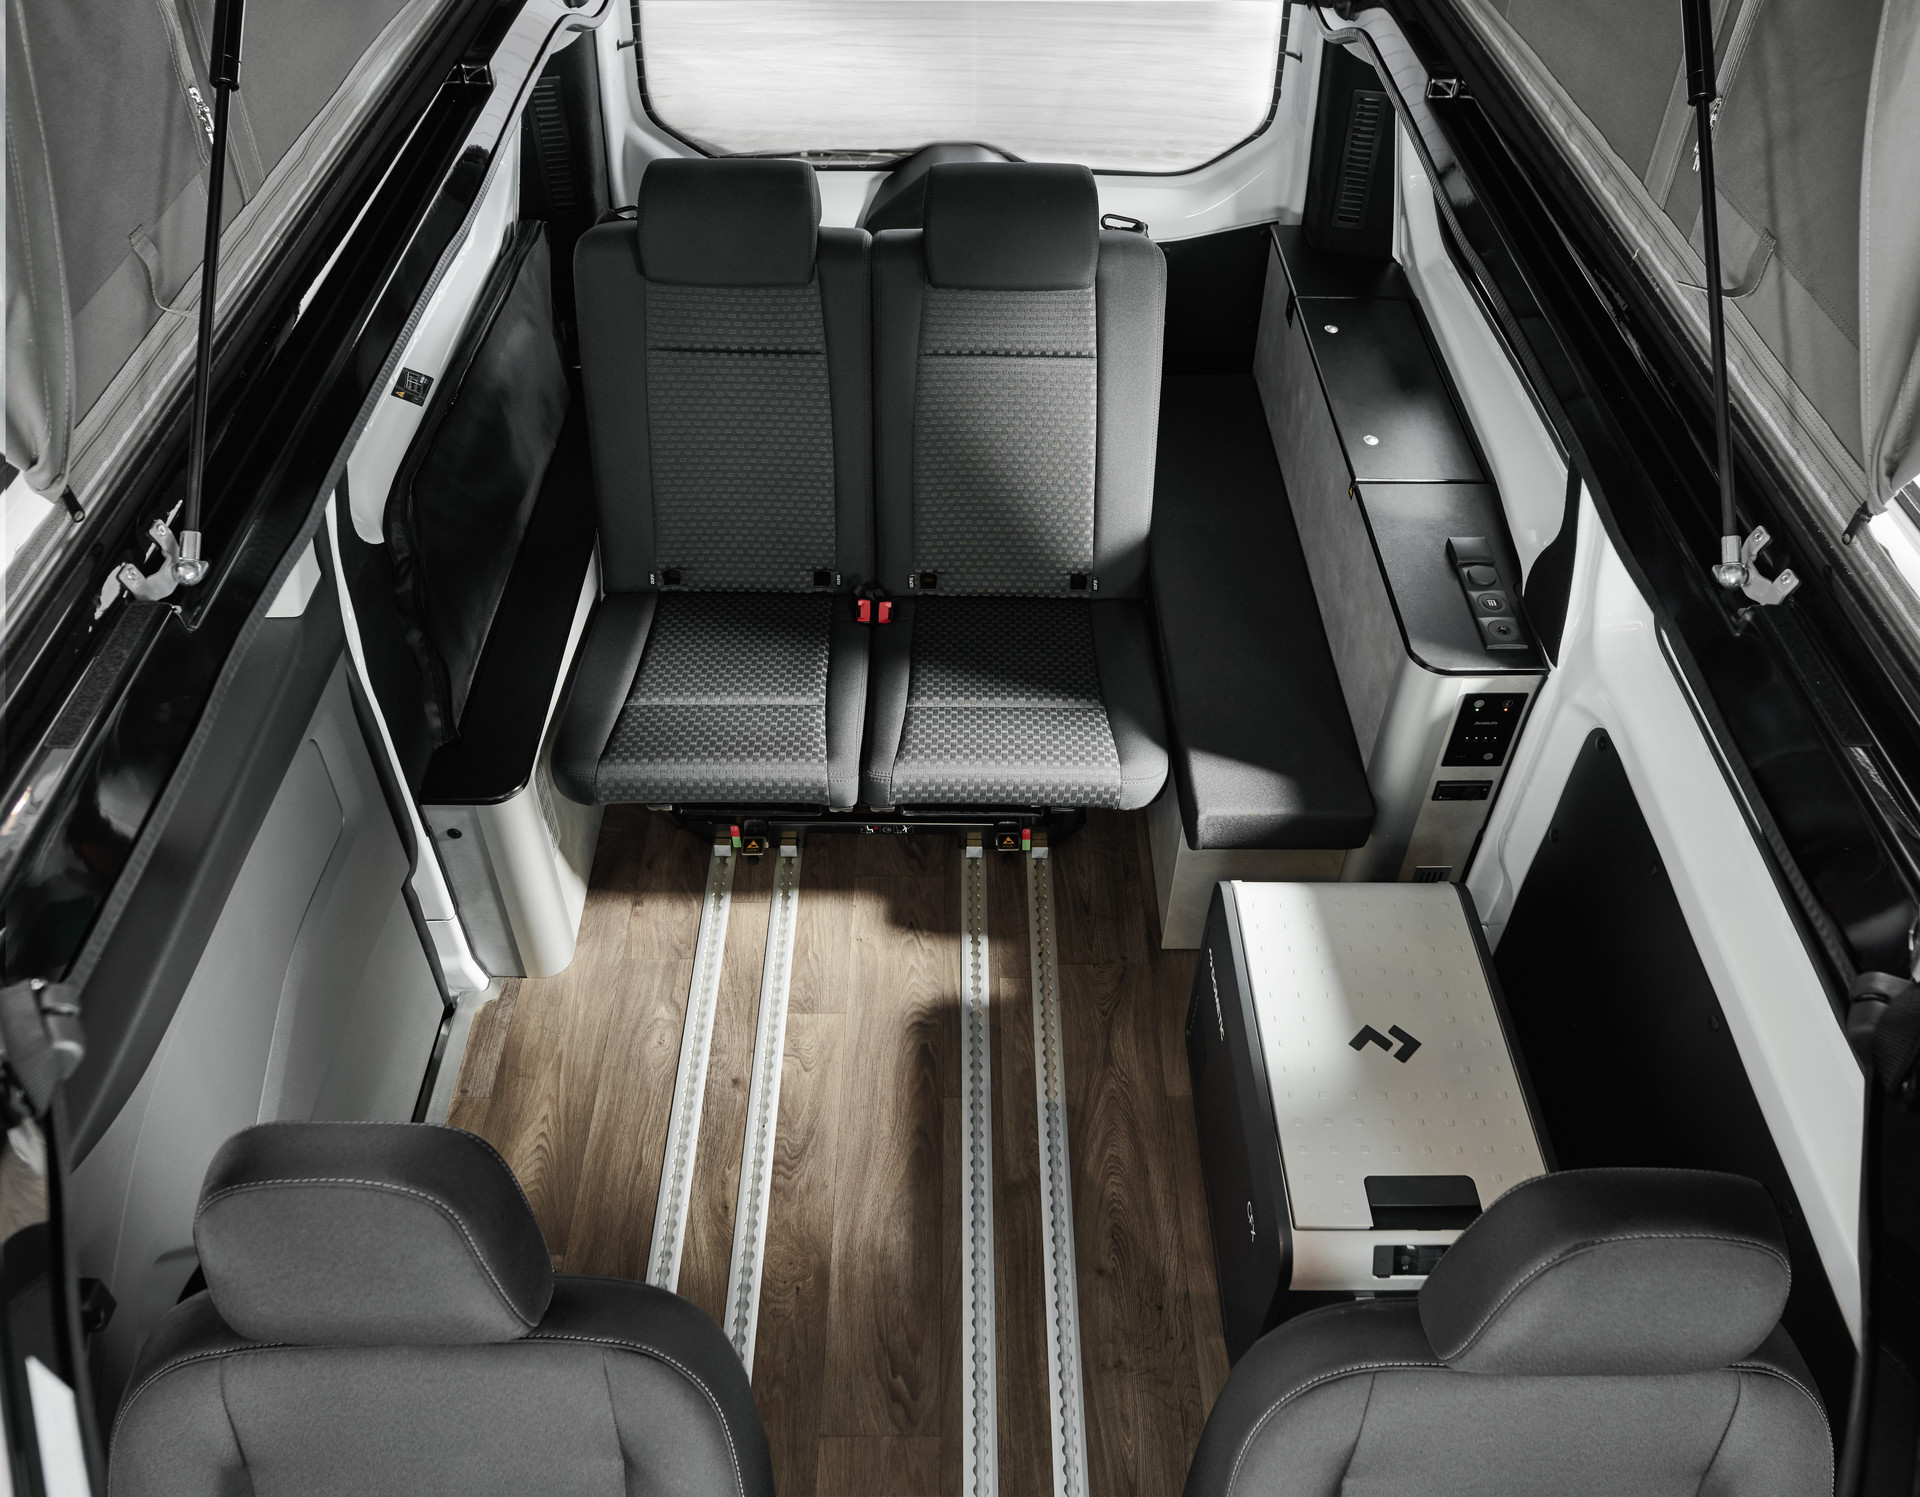 4-seater: the standard configuration with four seats and four berths